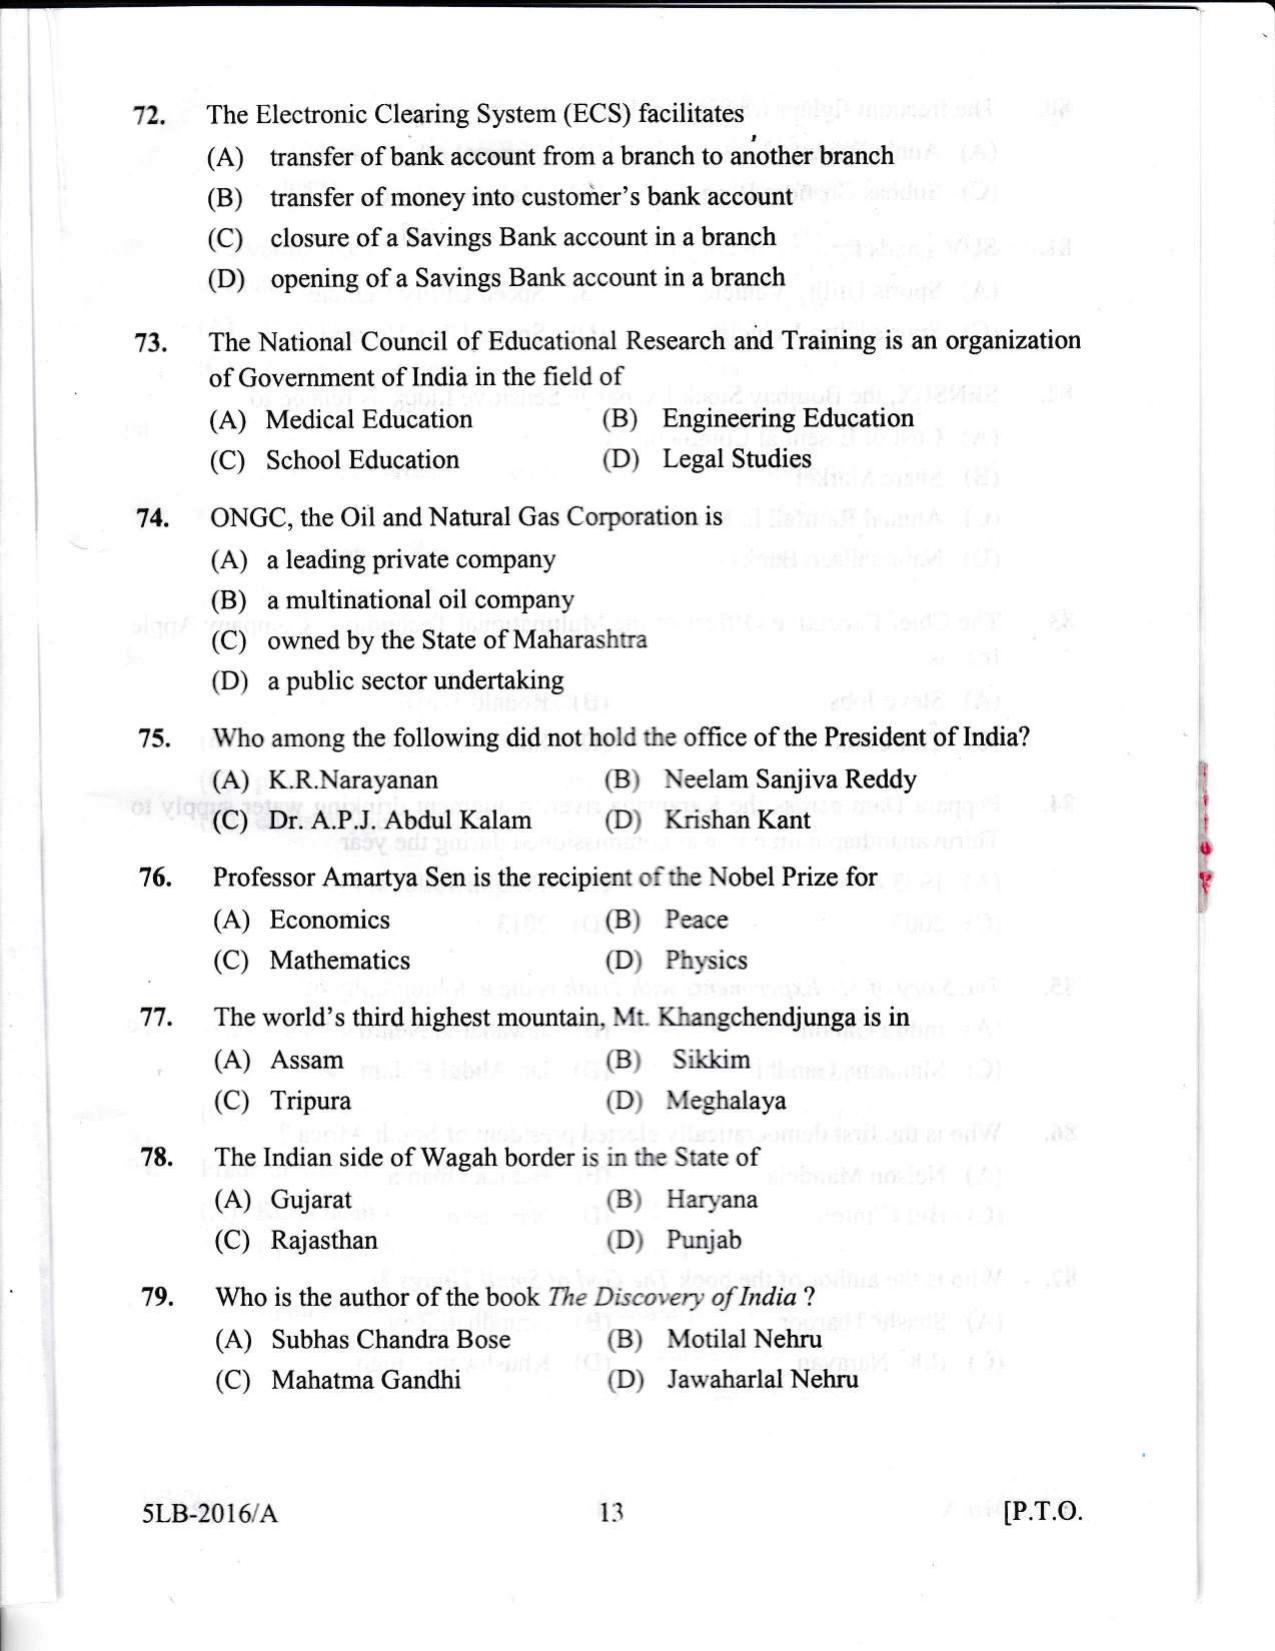 KLEE 5 Year LLB Exam 2016 Question Paper - Page 13